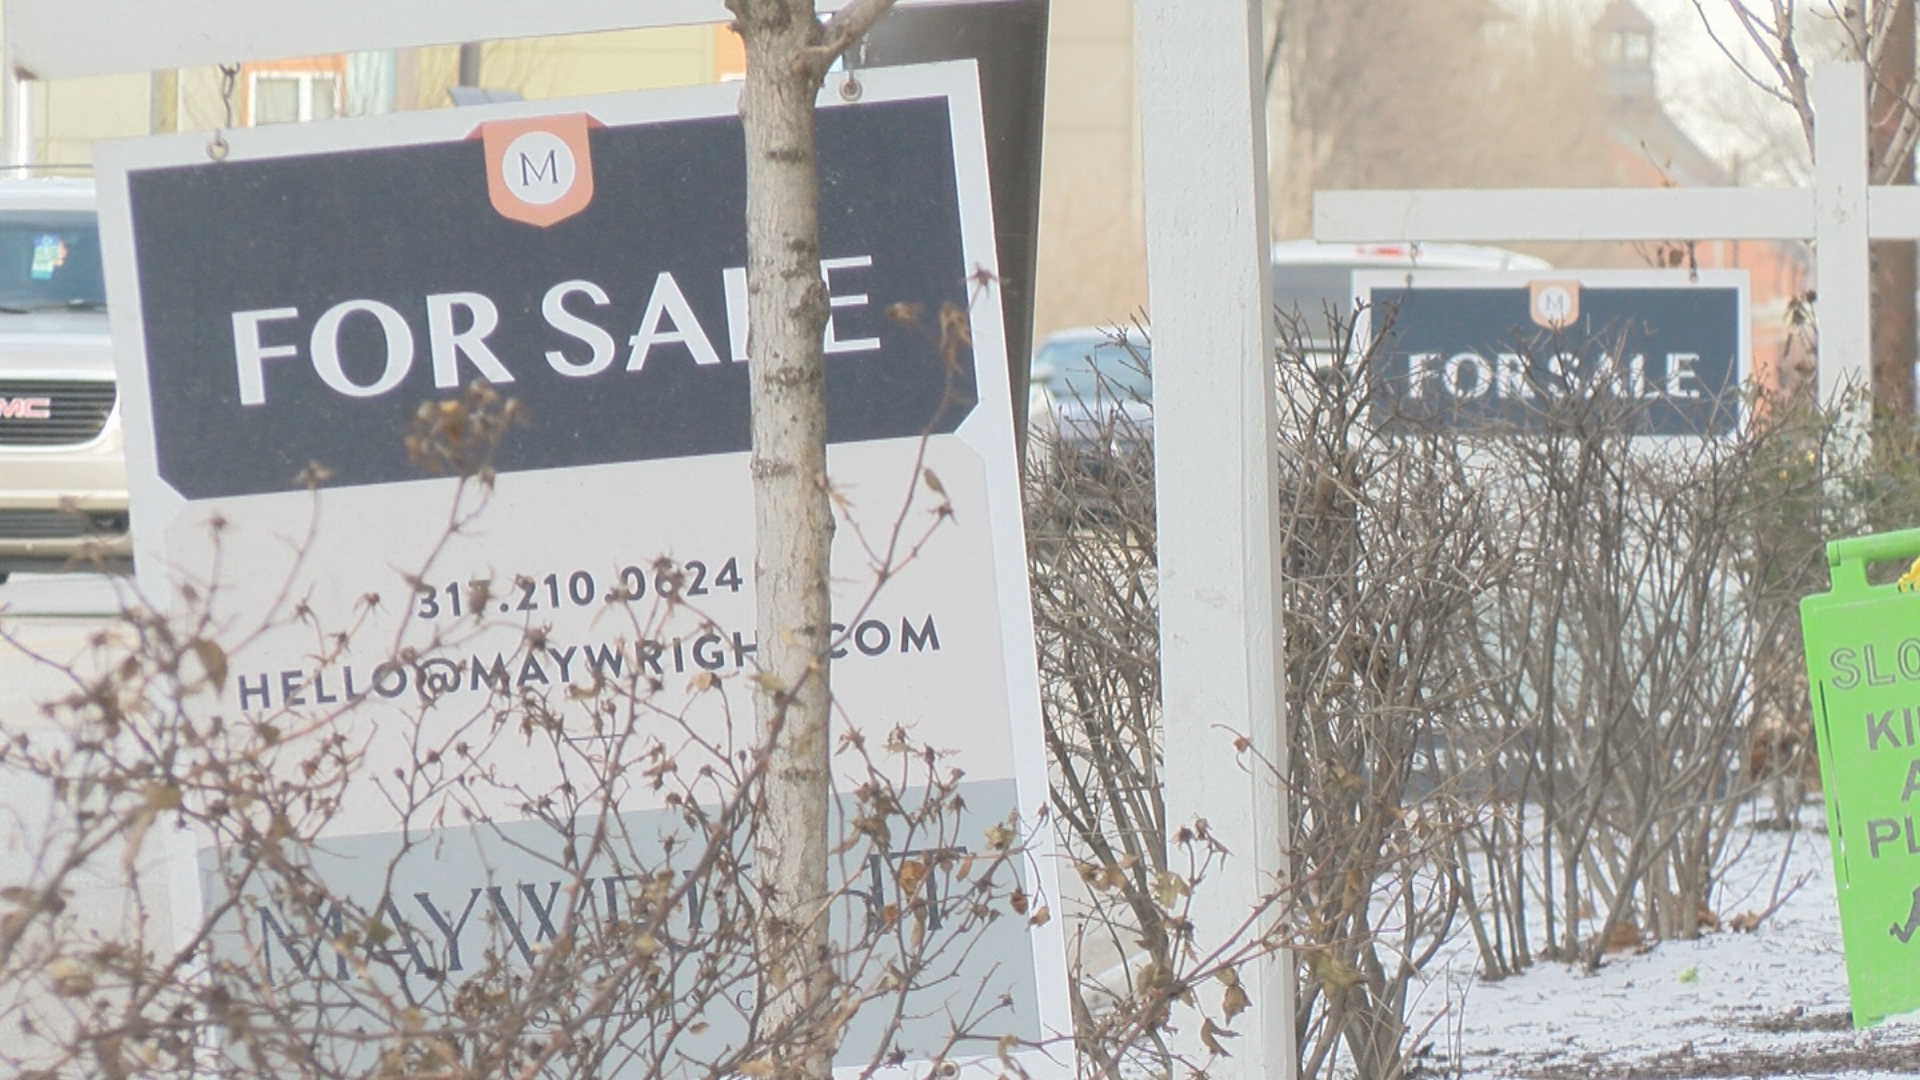 How Indianapolis housing market fares amid interest rate hikes from Fed